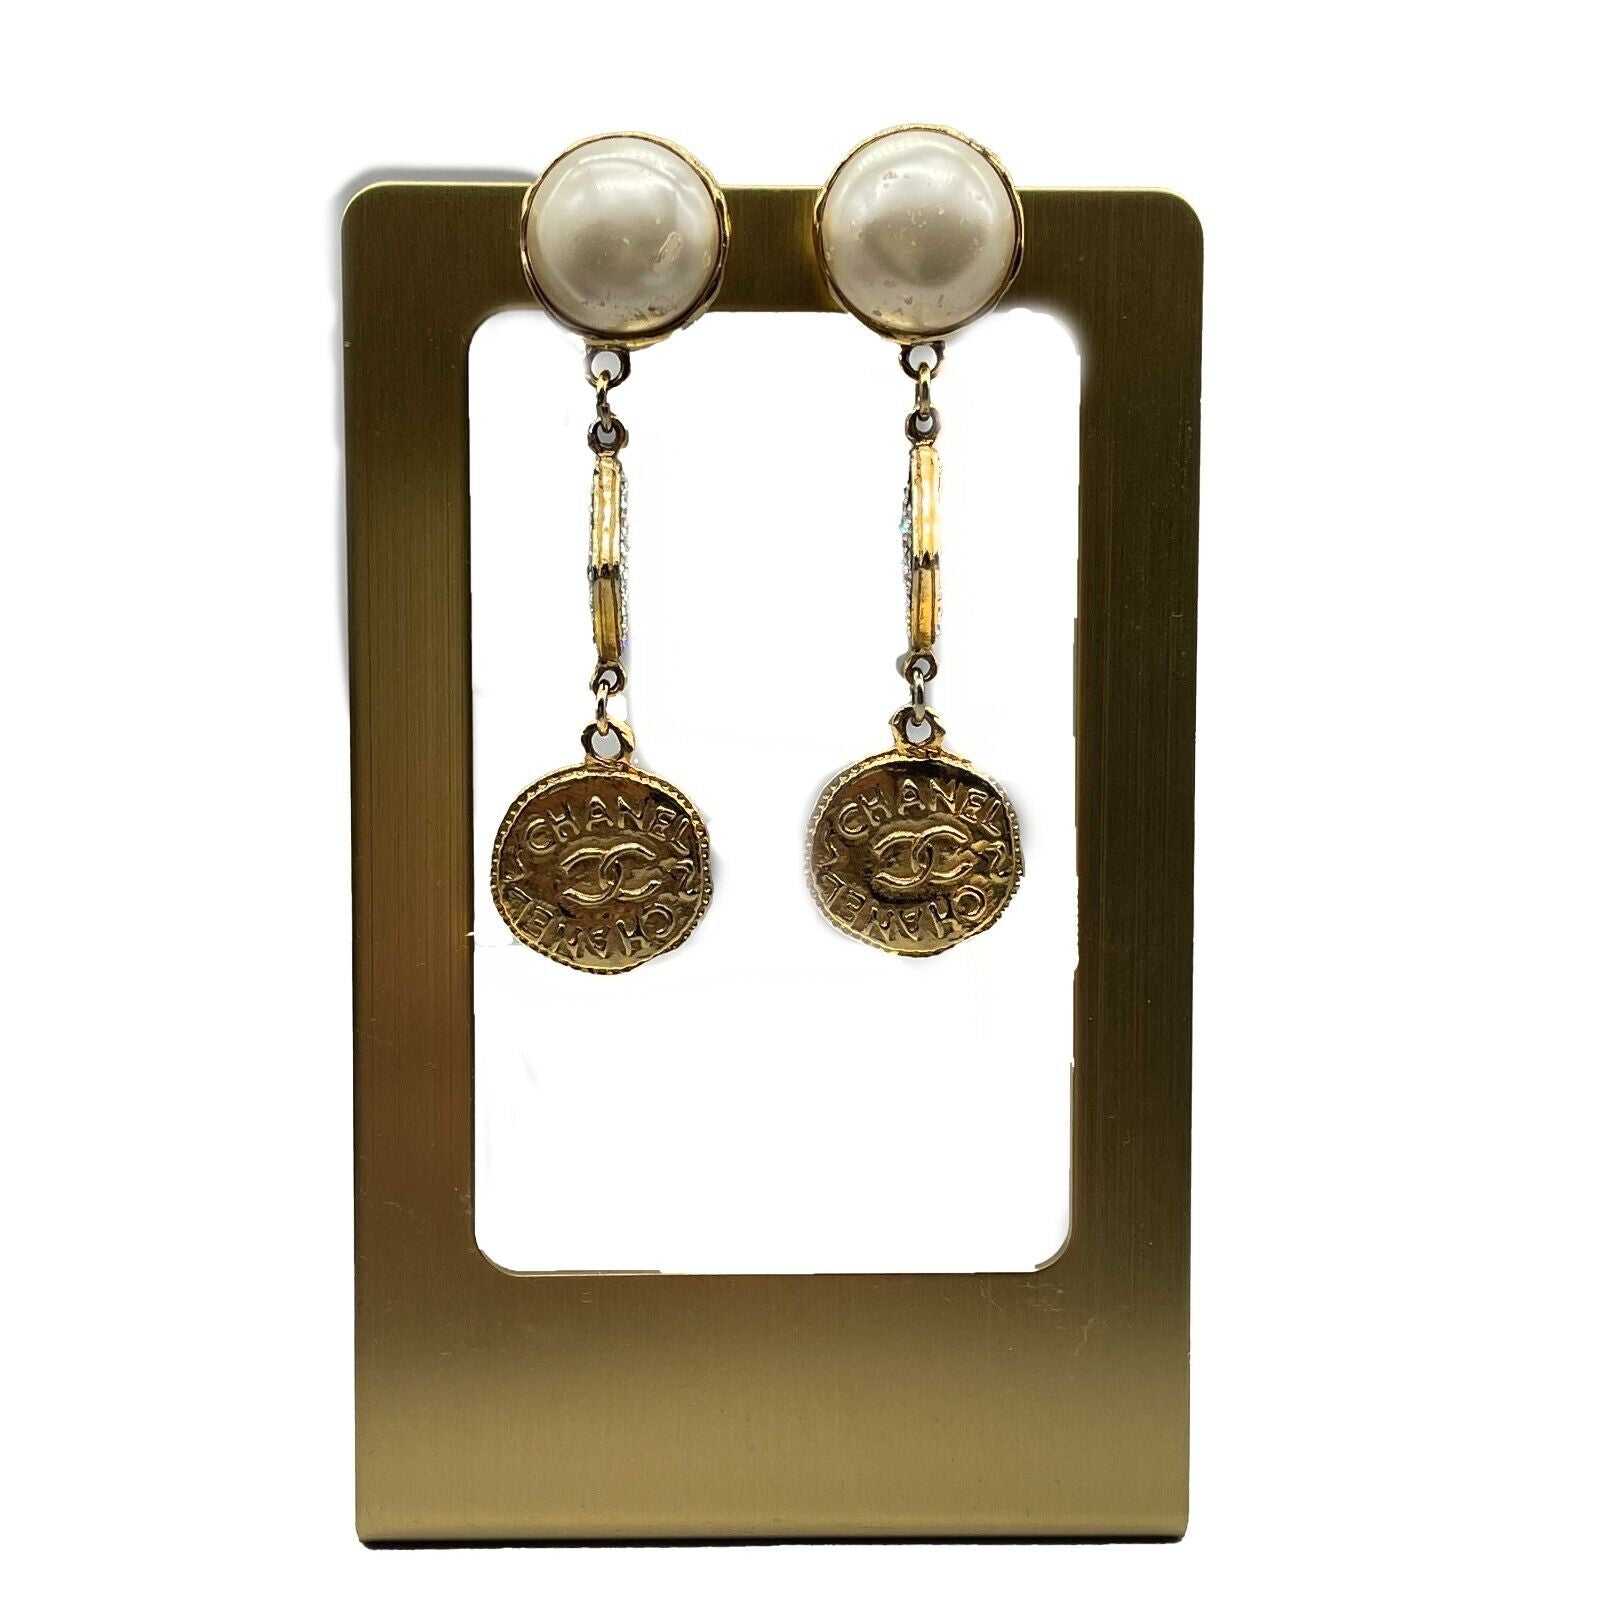 CHANEL - Vintage 1970s Faux Pearl Medallion CC 'CHANEL' Clip-On